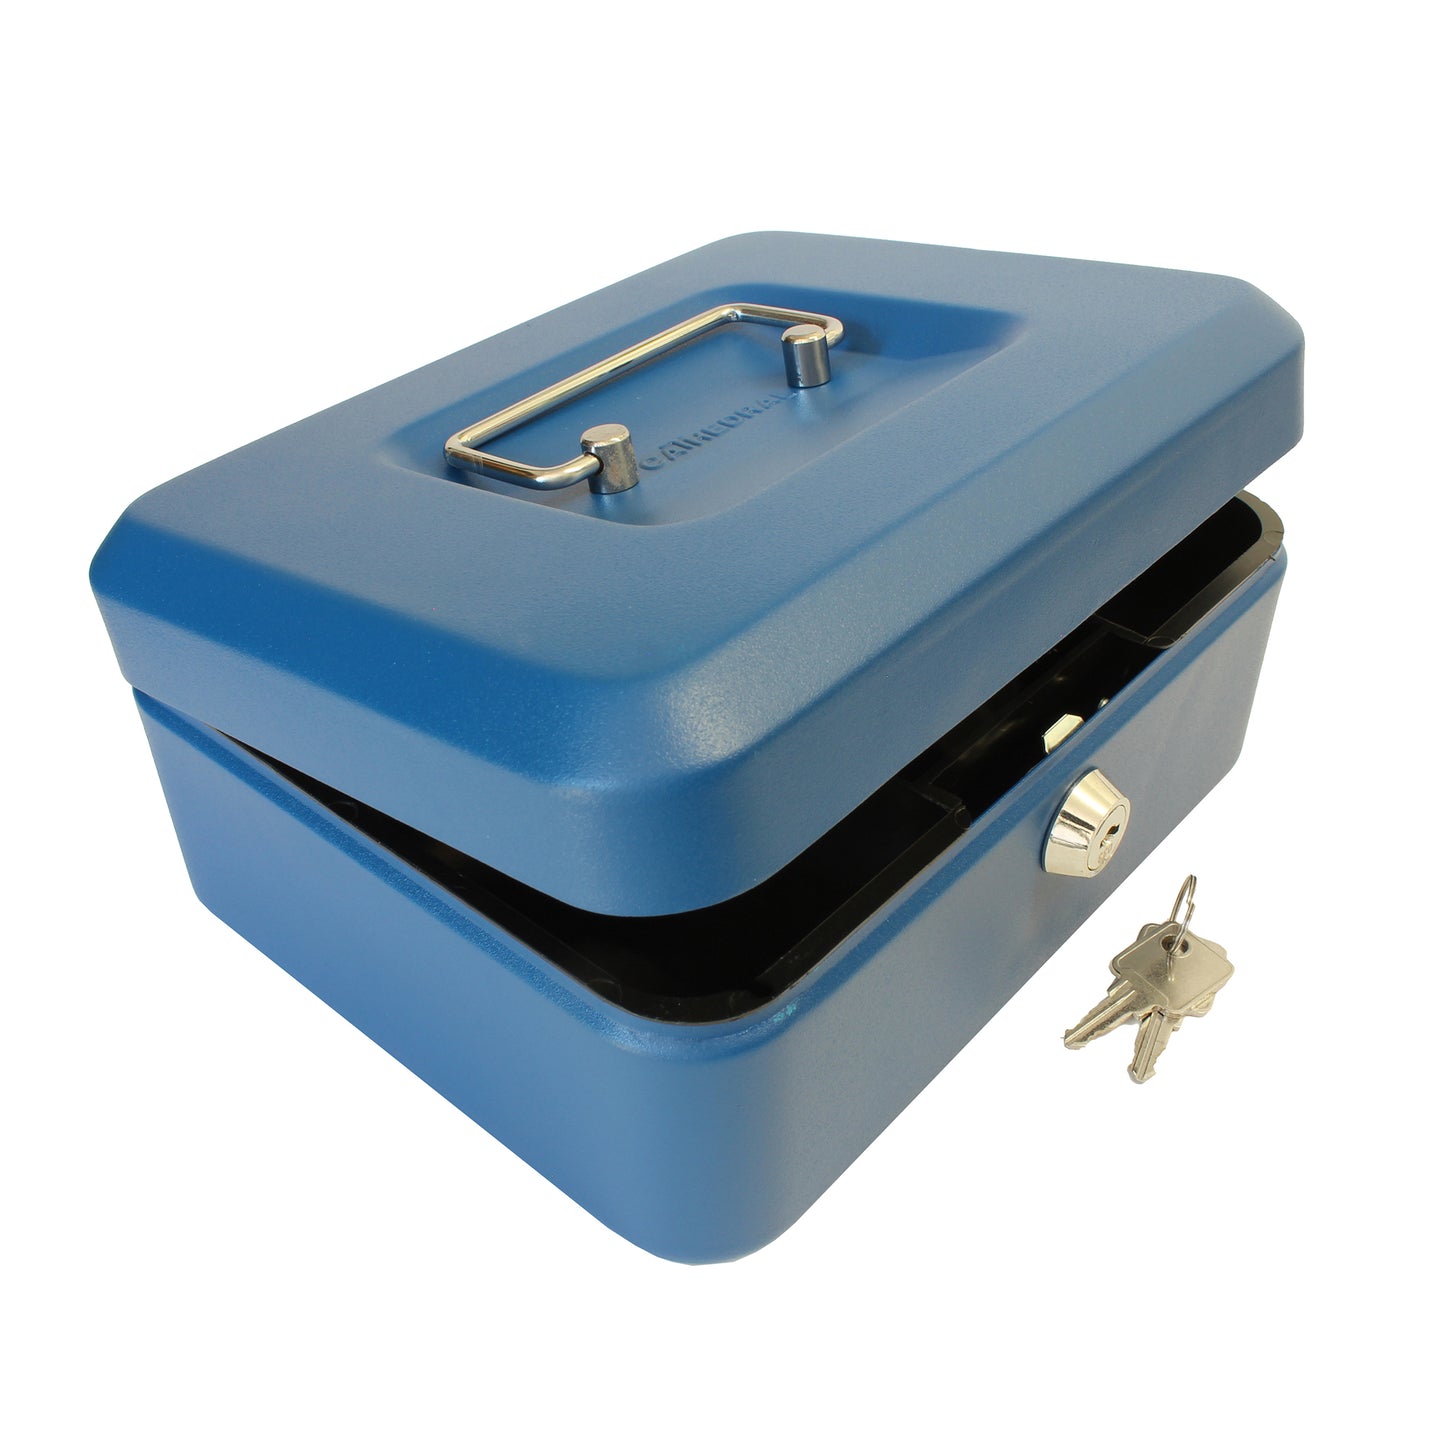 Key Lockable Cash Box with Lift Out 6 Compartment Coin Tray - 8 Inch